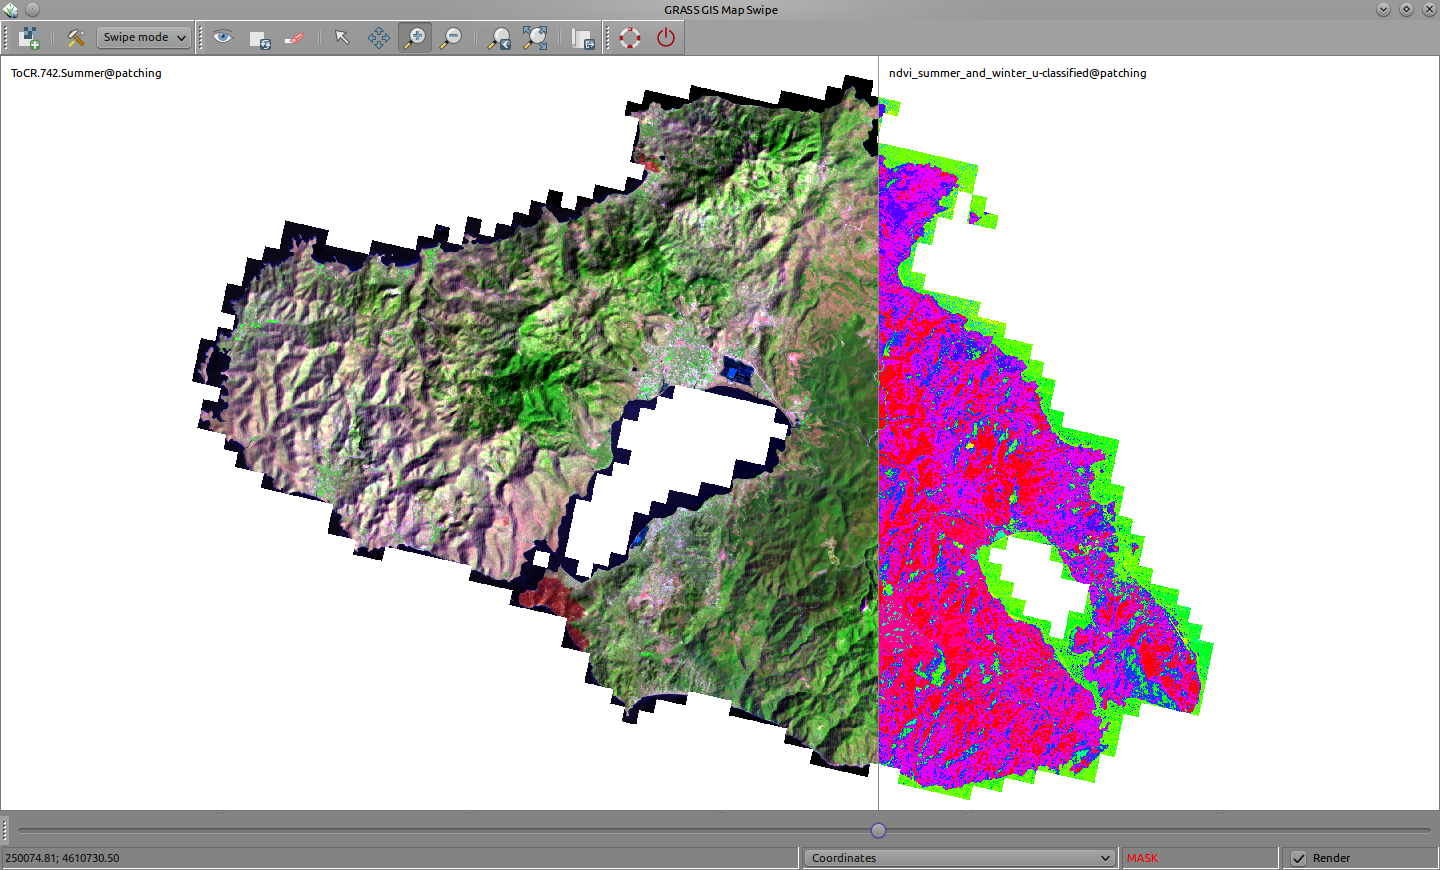 File:Grassgis swiping landsat rgb 743 and unsupervised classification of a bitemporal ndvi lesvos aegean sea greece.png